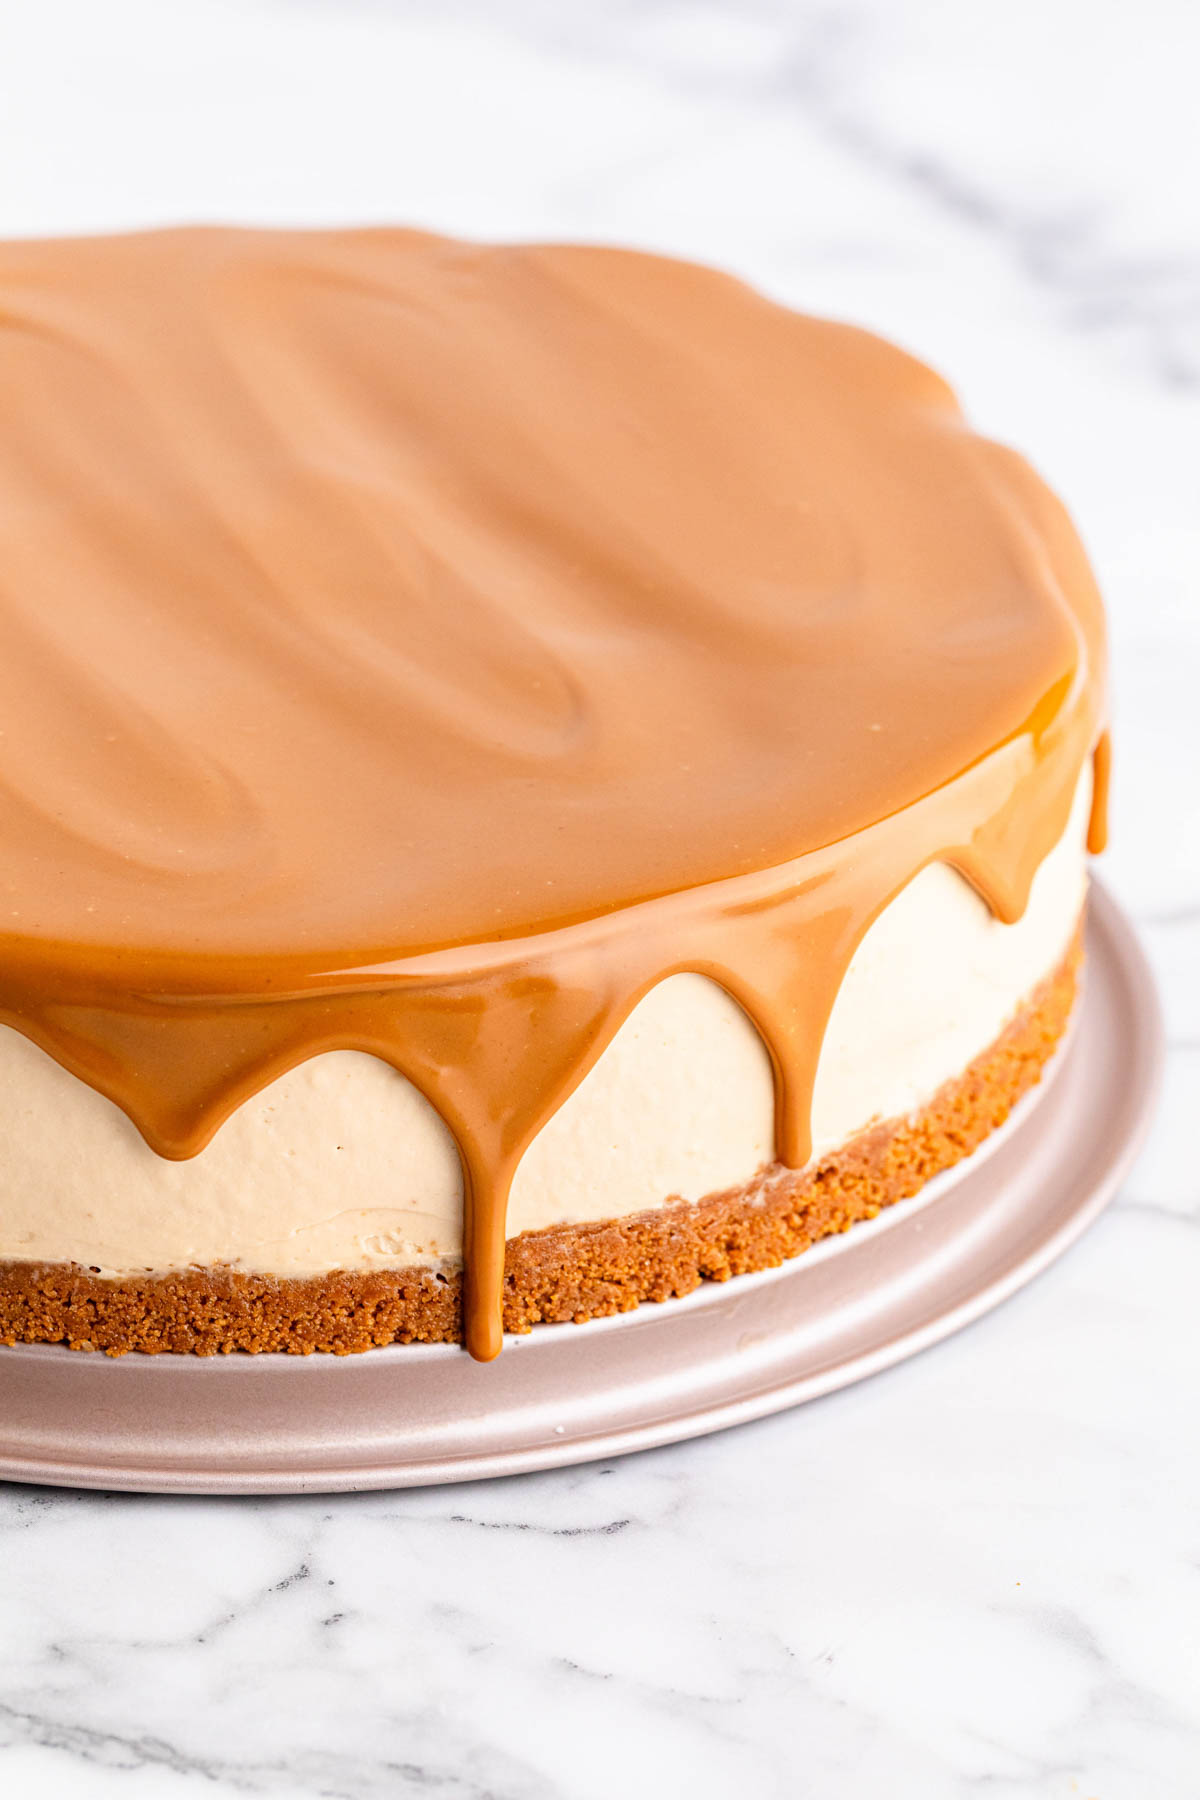 Biscoff topping dripping over the side of the cheesecake